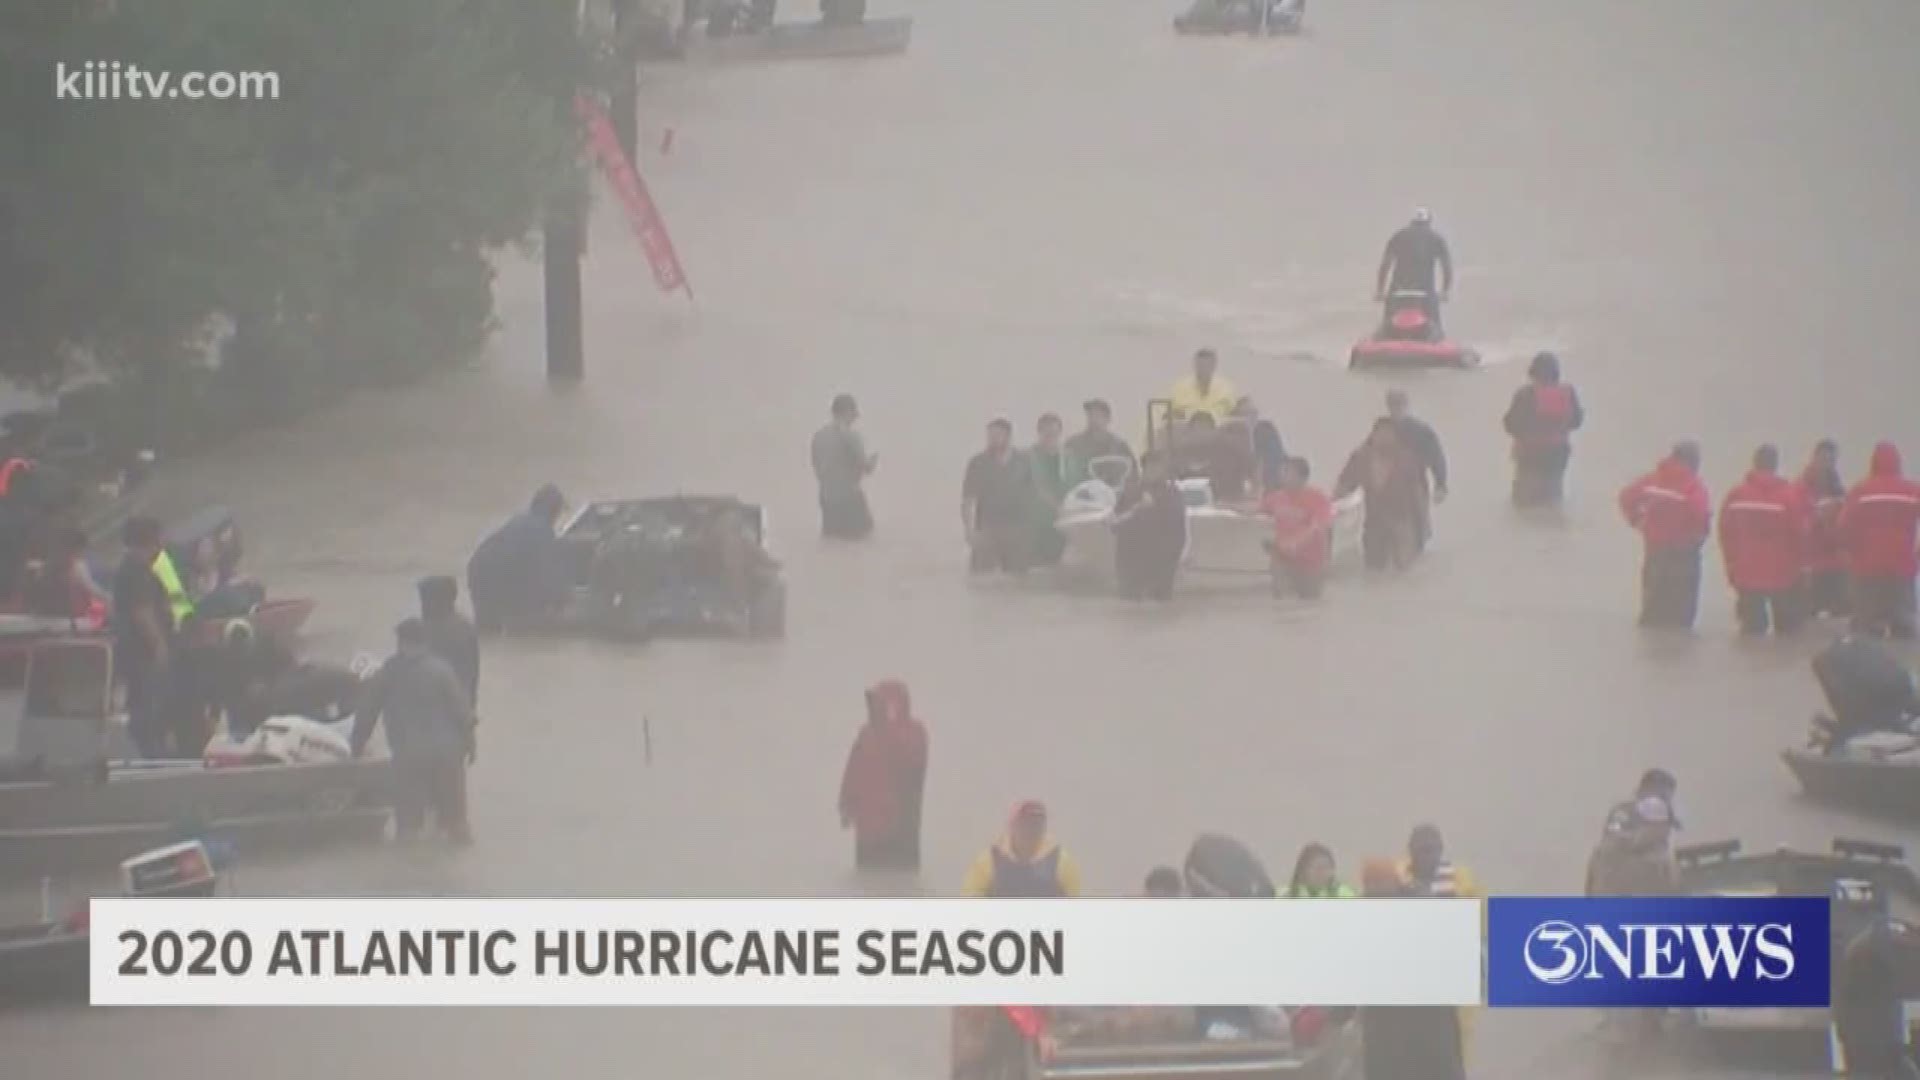 Officials stress that although we are still facing a pandemic, hurricane season is upon us and now more than ever is a time to try and prepare as early as possible.